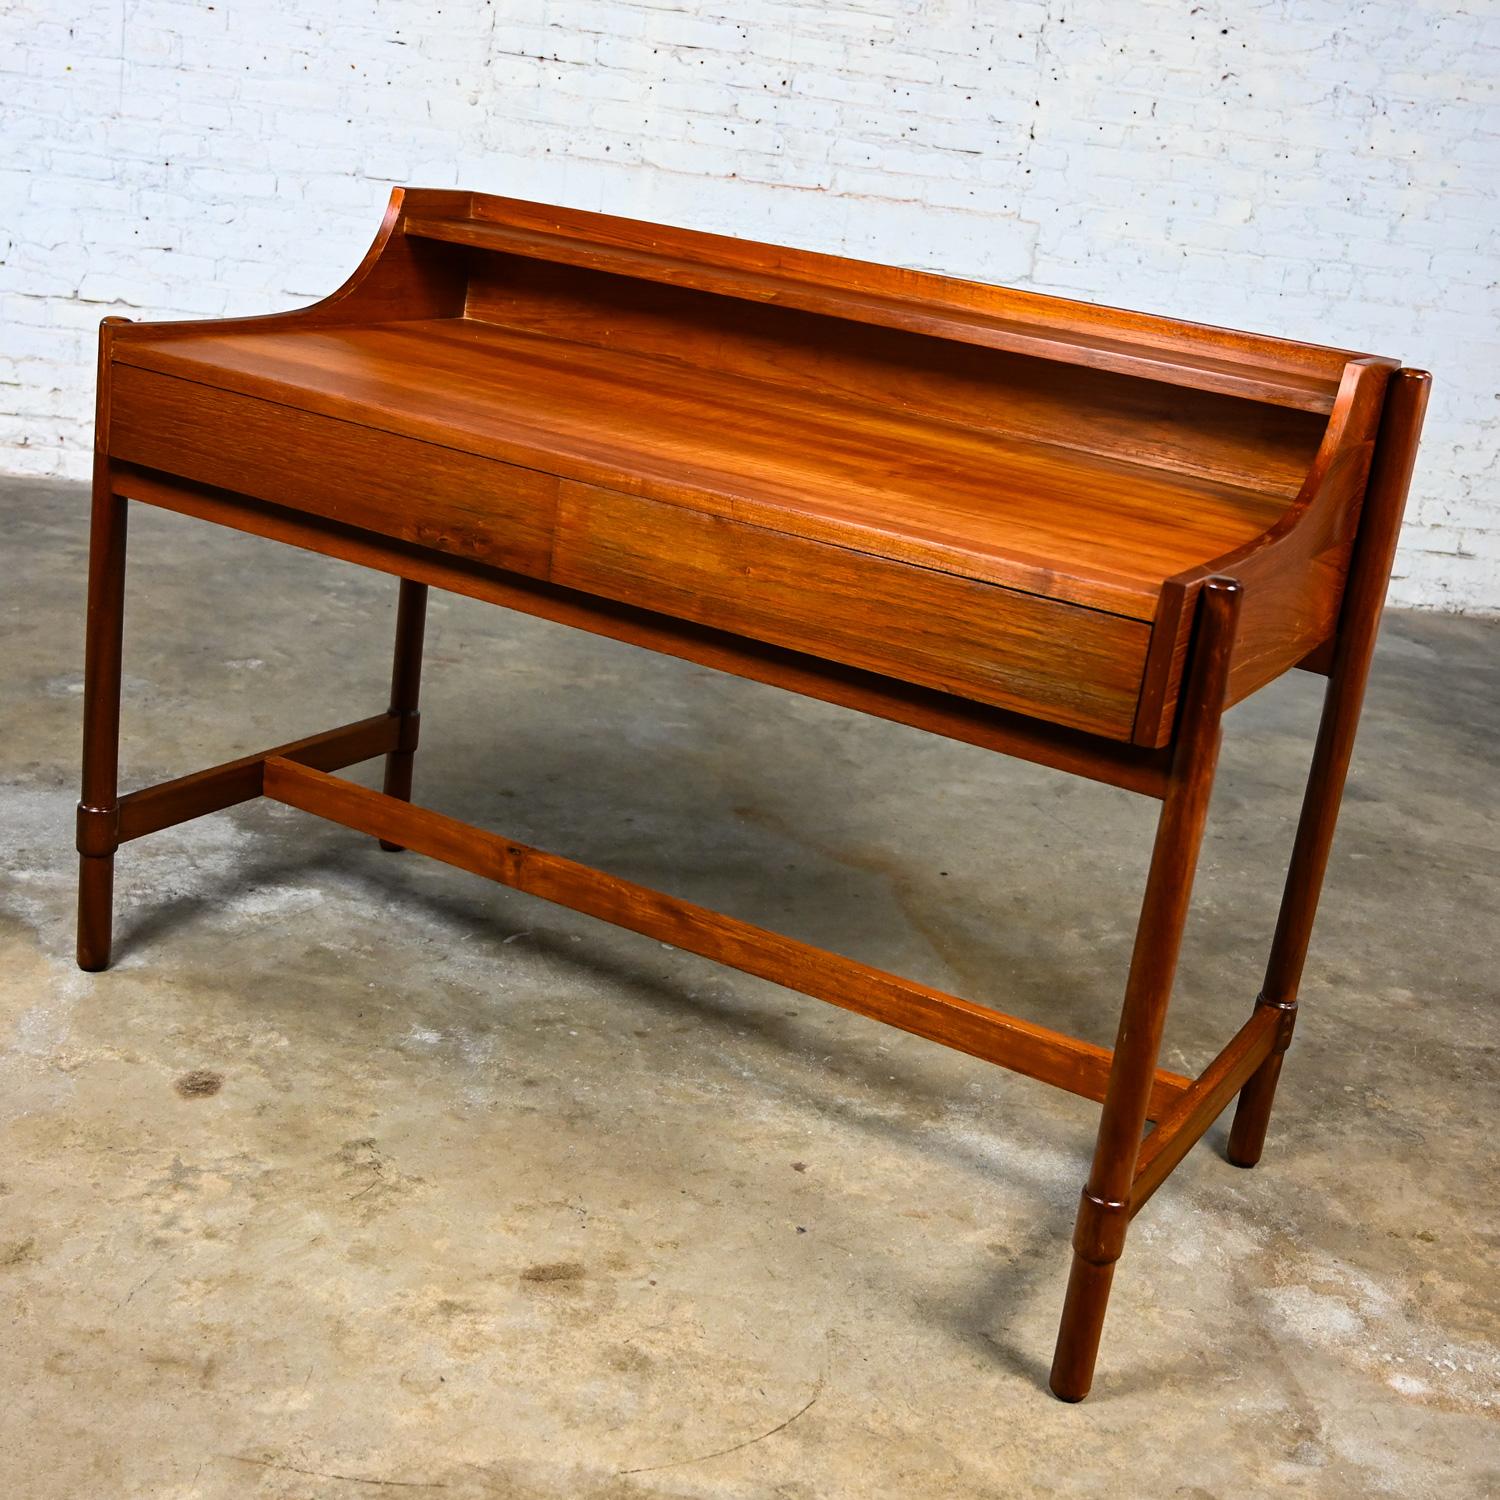 Handsome vintage mid-century modern or Scandinavian Modern teak writing desk with raised back shelf, 2 drawers, and straight round legs, made in Bangkok. Beautiful condition, keeping in mind that this is vintage and not new so will have signs of use